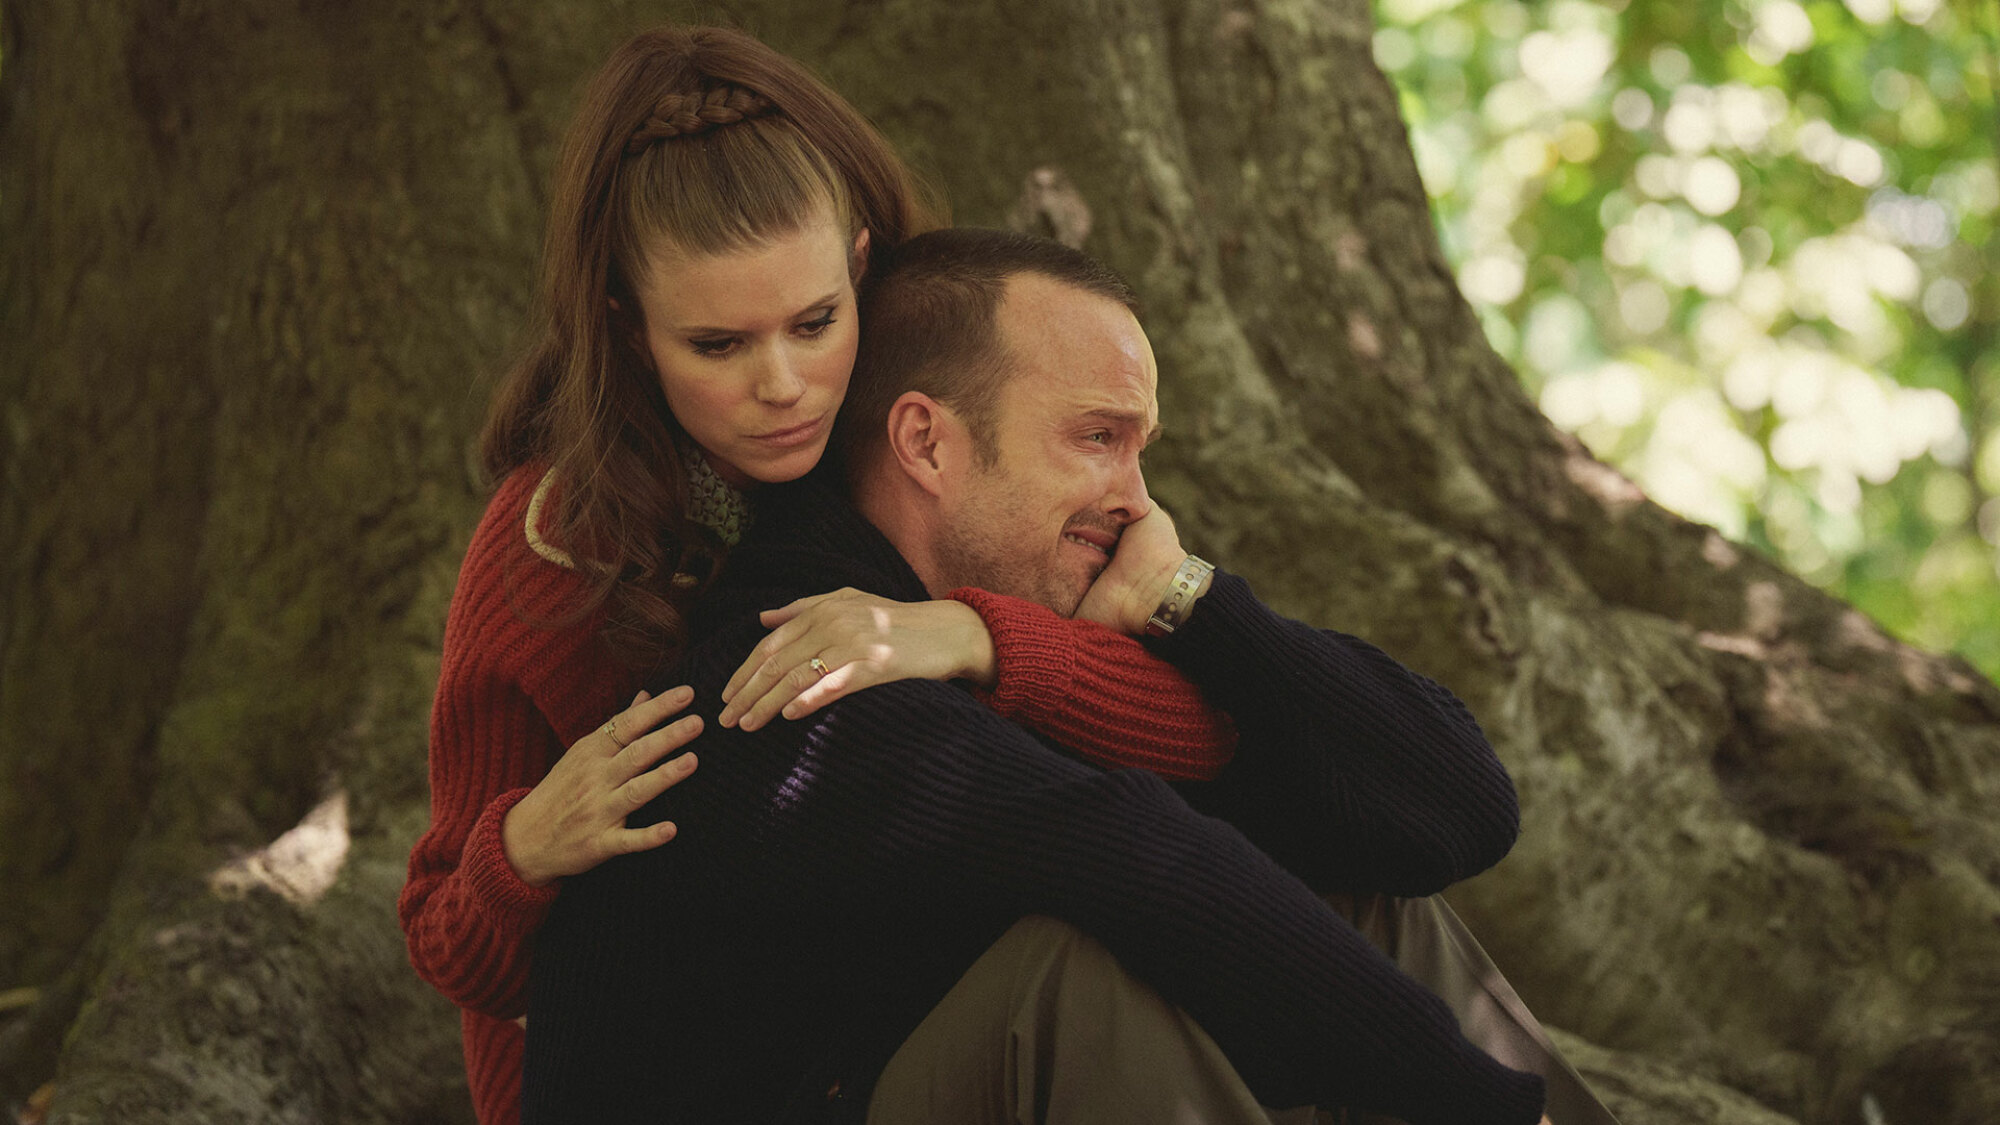 A woman hugs a crying man at the foot of a tree.